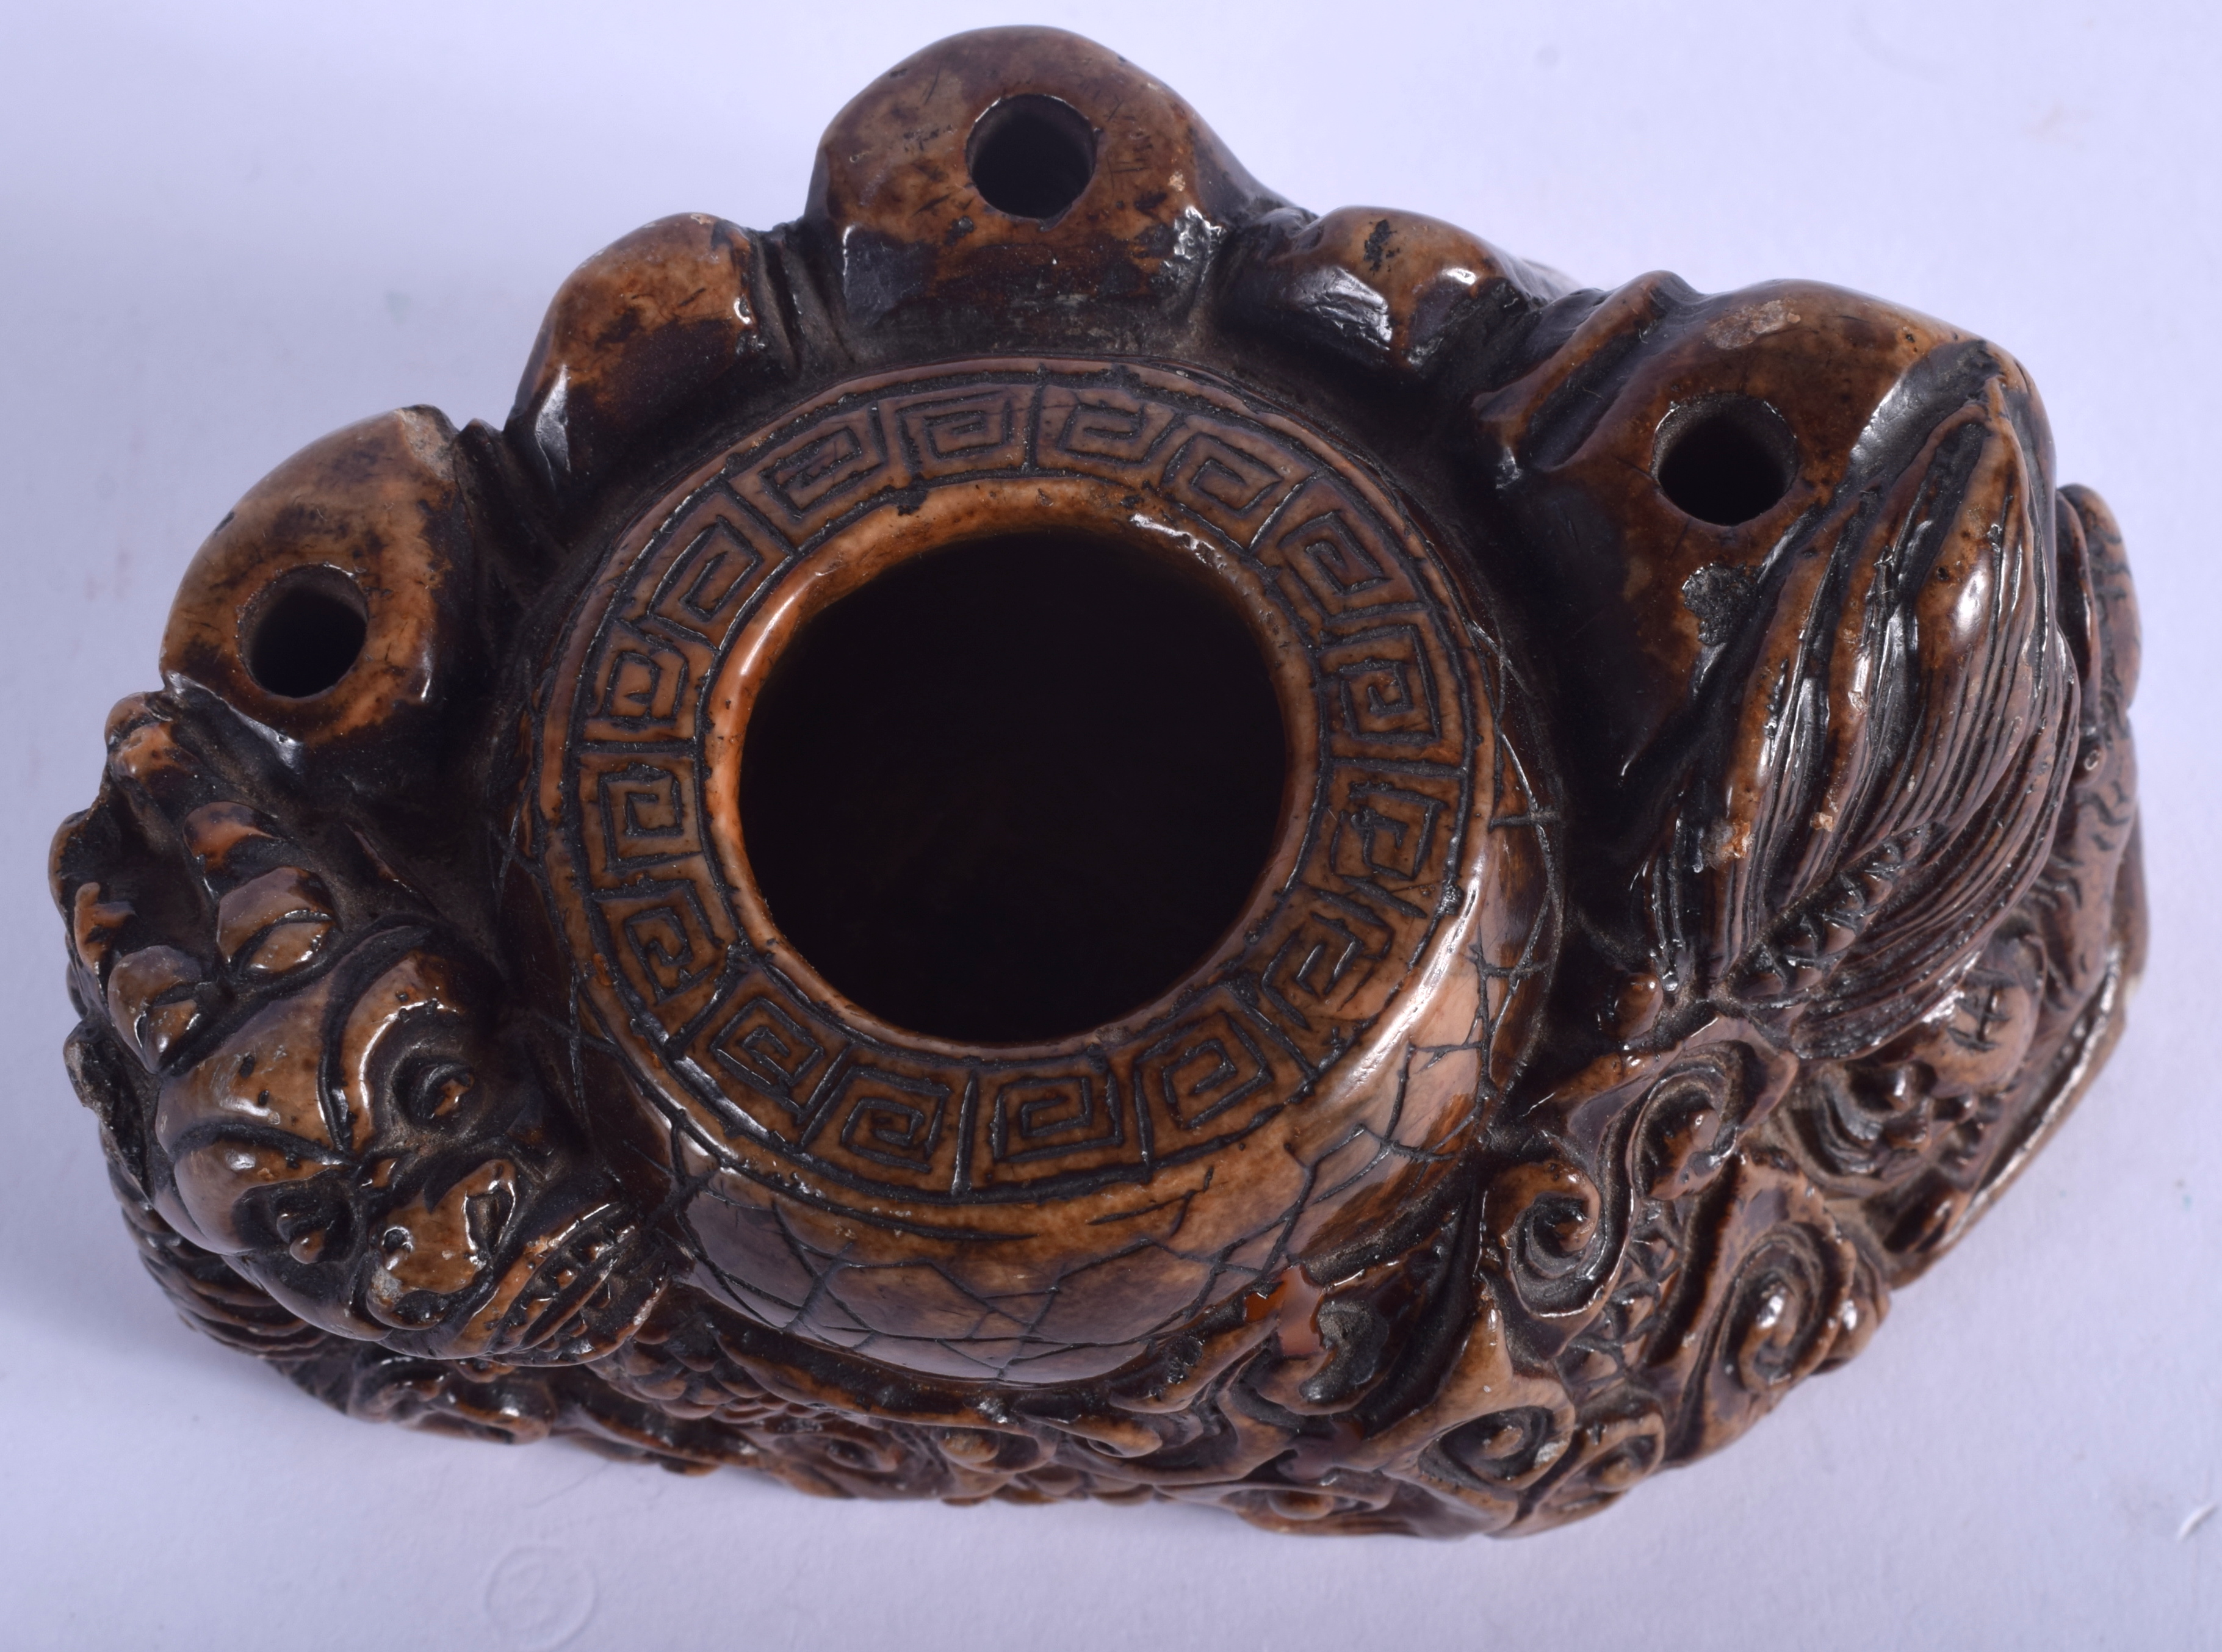 A CHINESE QING DYNASTY SOAPSTONE BRUSH POT. 10 cm x 6 cm. - Image 3 of 4